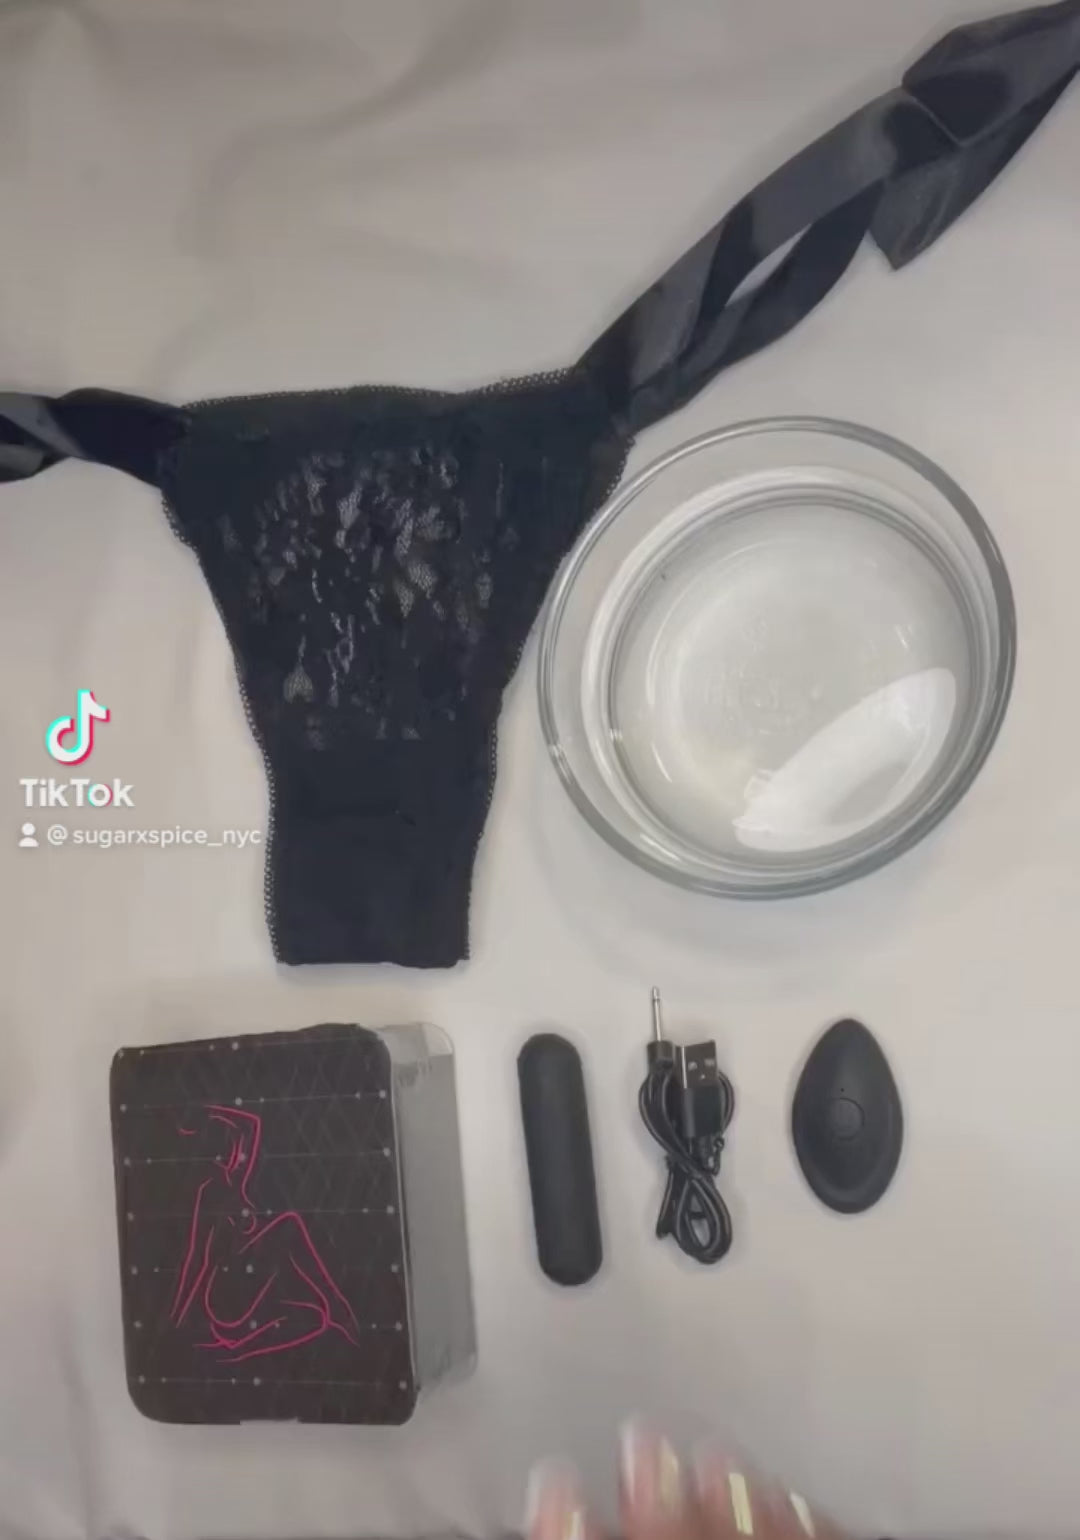  Wireless Remote Control Vibrating Panties with 3